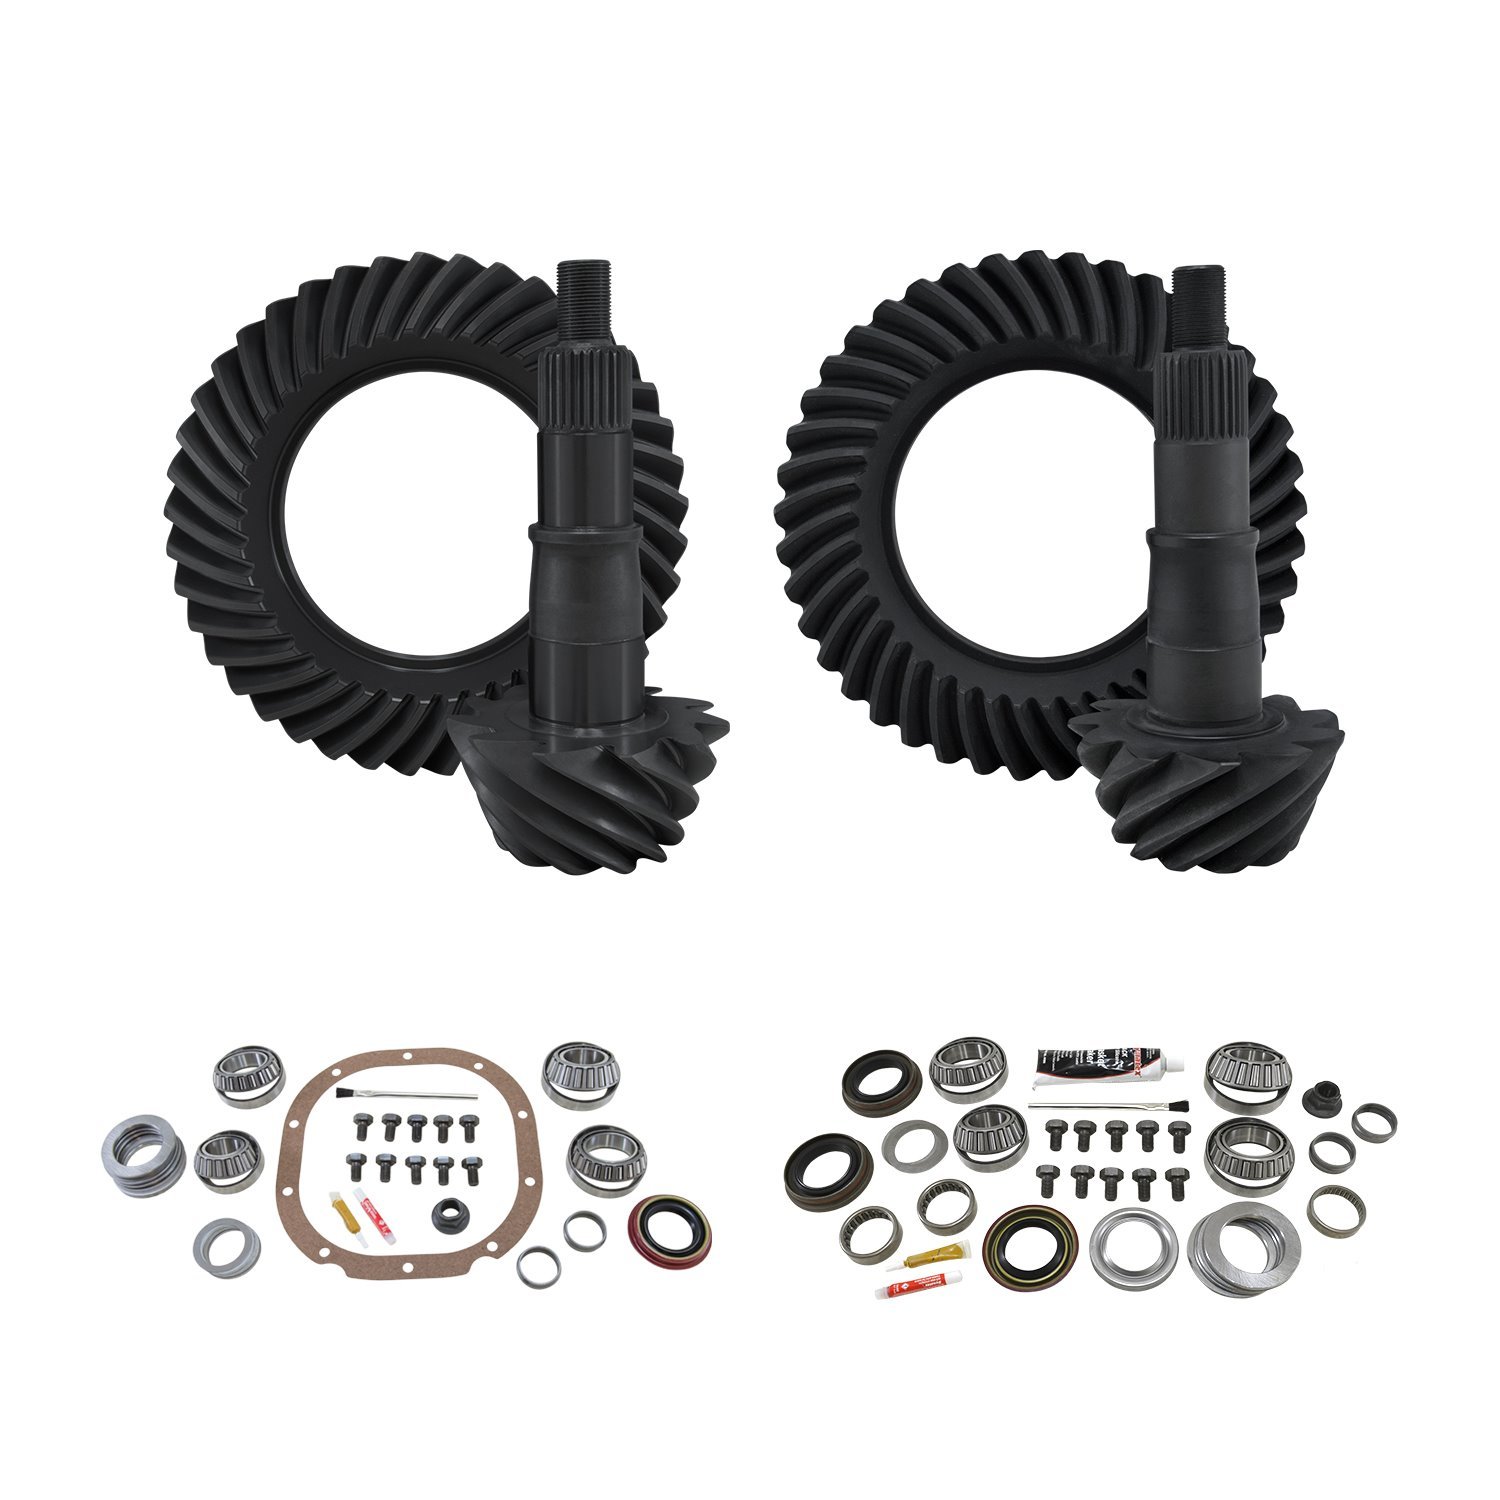 Re-Gear & Installation Kit, Ford 8.8 in., 2000-2008 F150, 3.73 Ratio, Fr&Rr